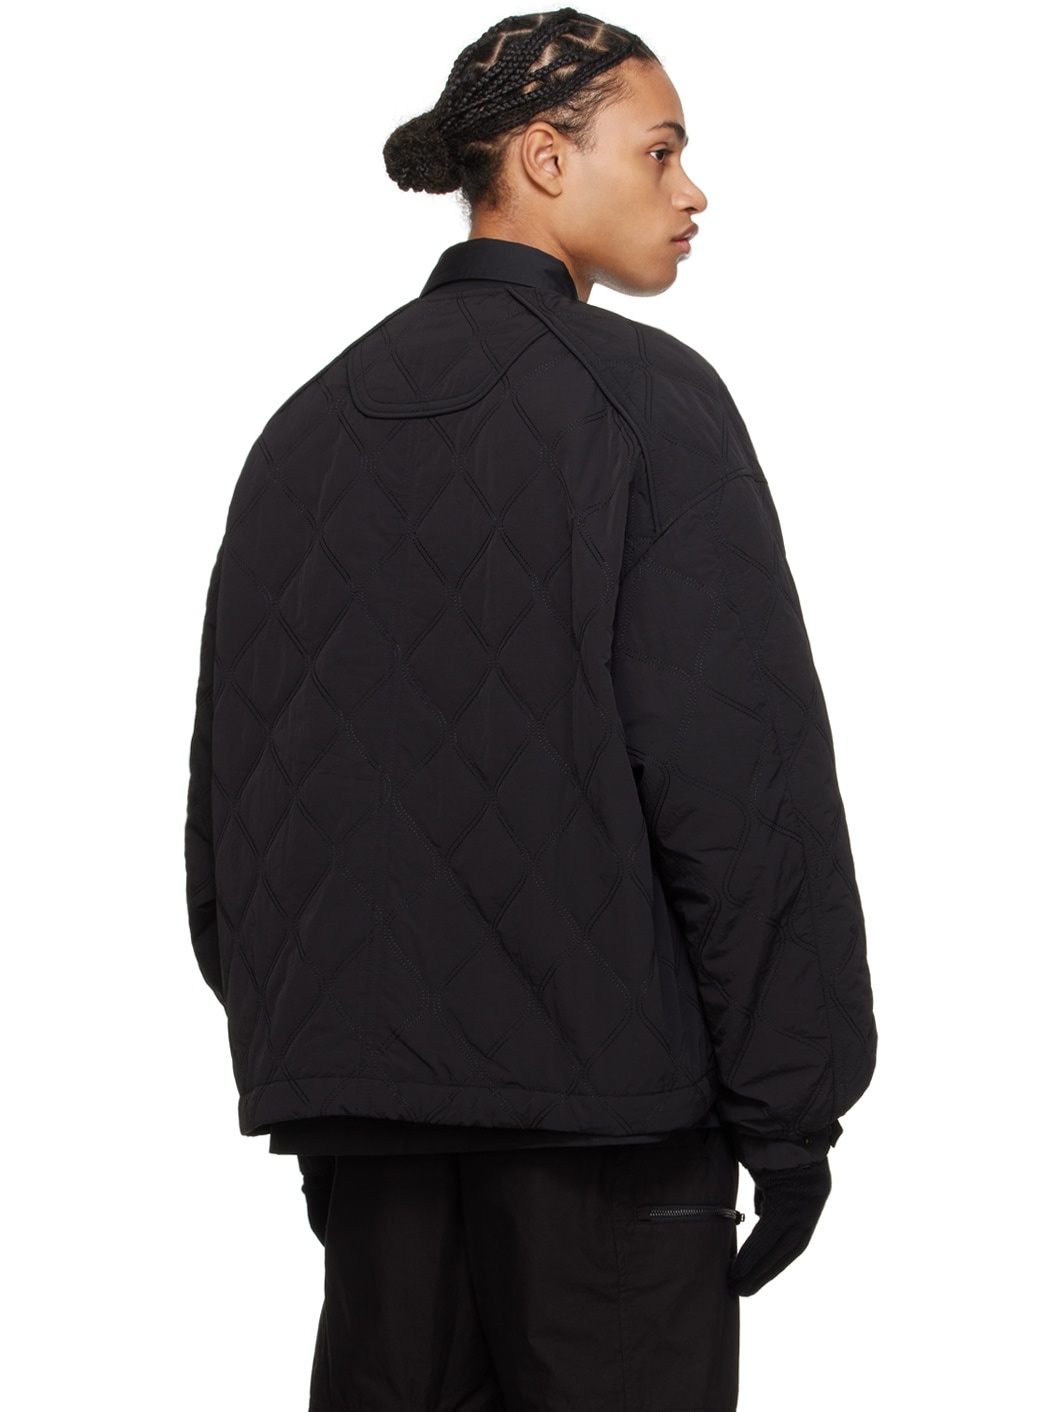 Black Quilted Jacket - 3